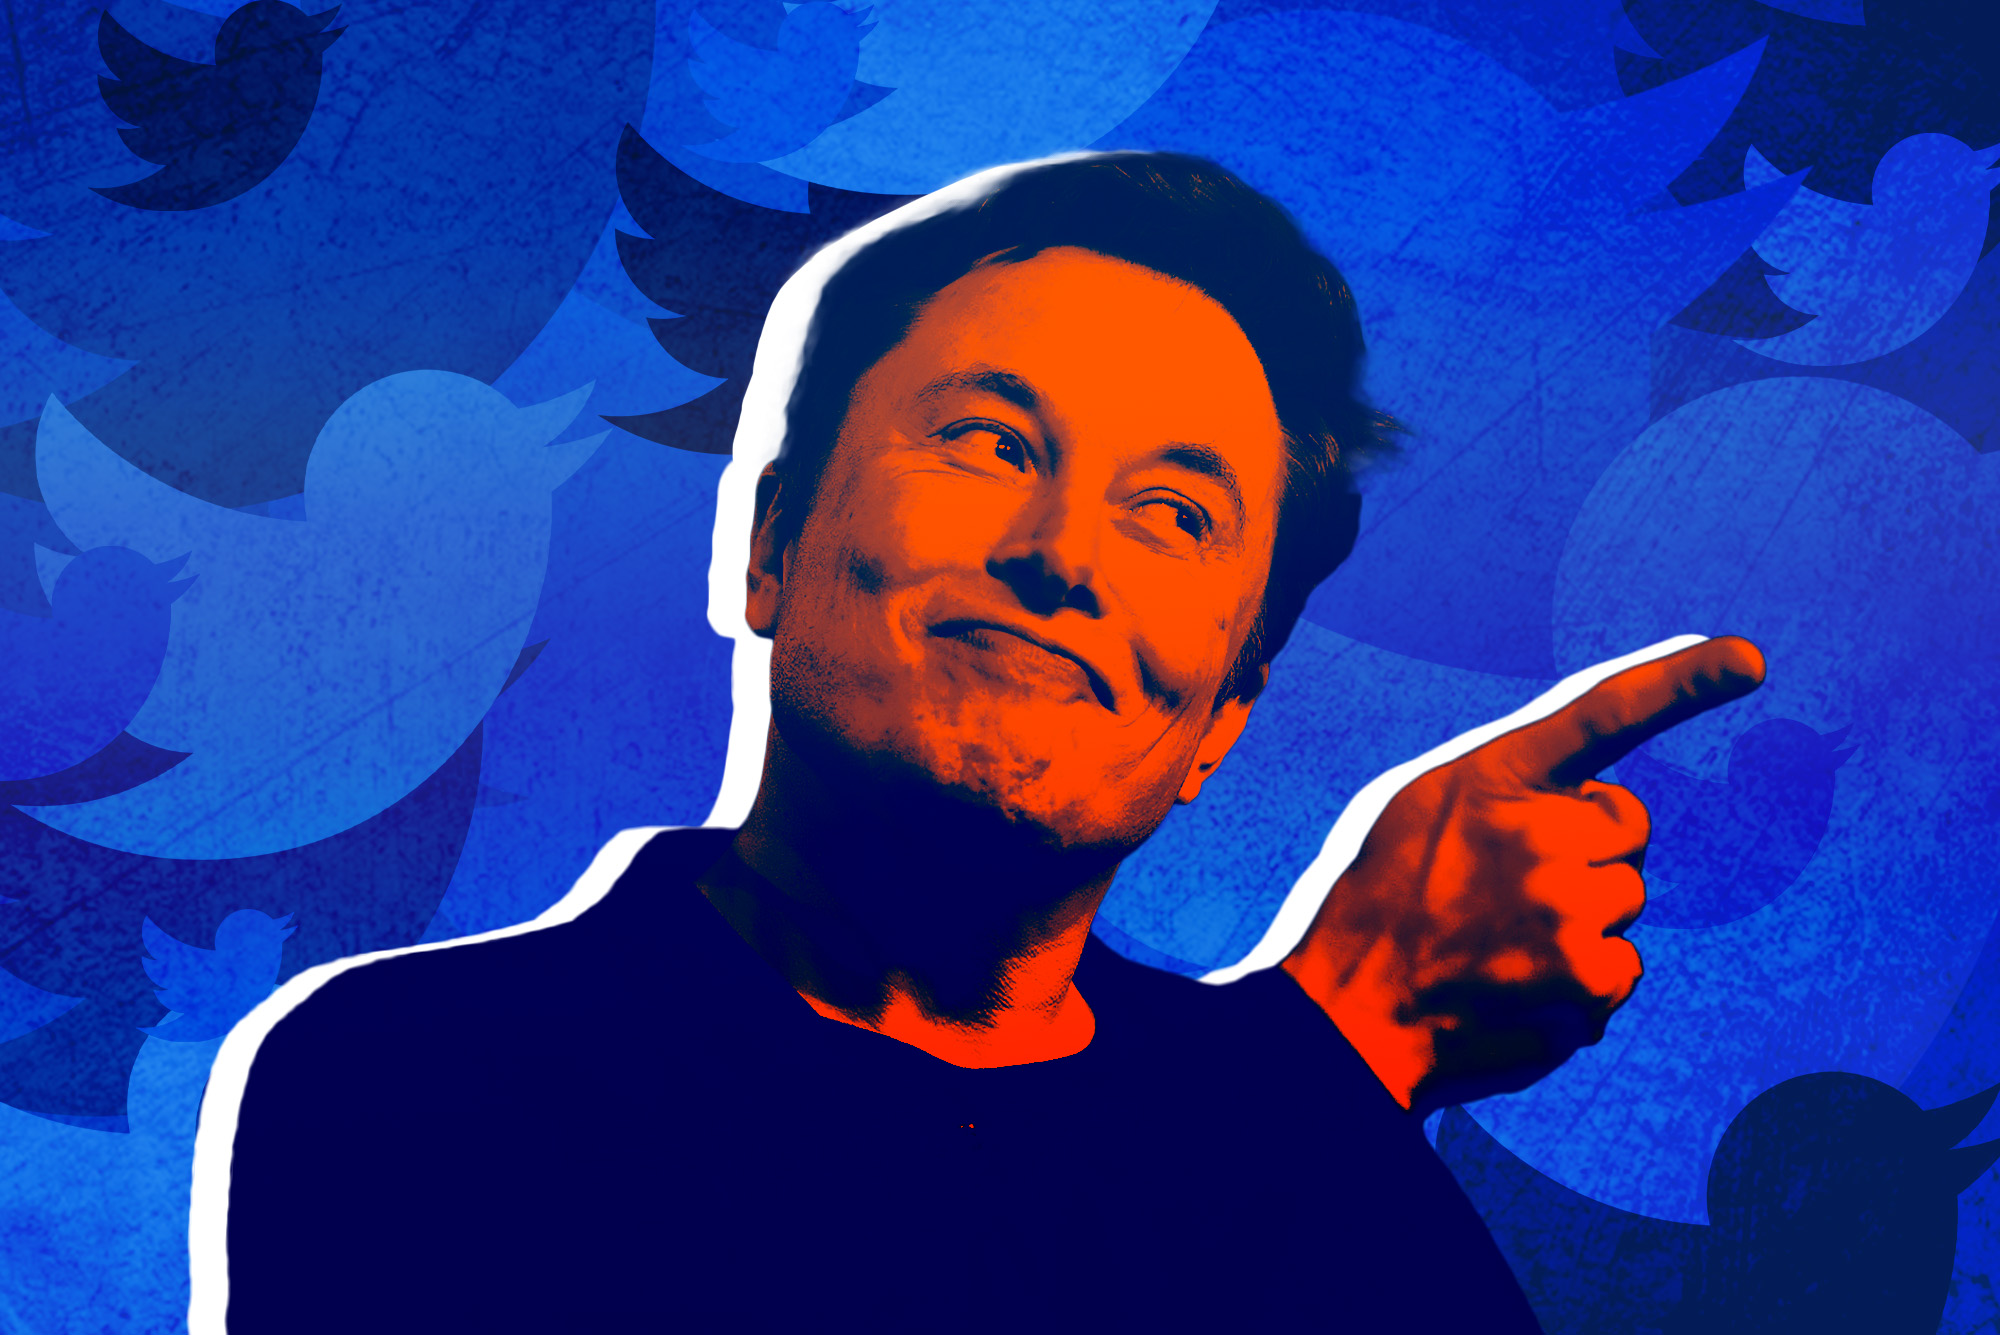 A digital image of Elon Musk in front of a stylized background with the Twitter logo repeating.